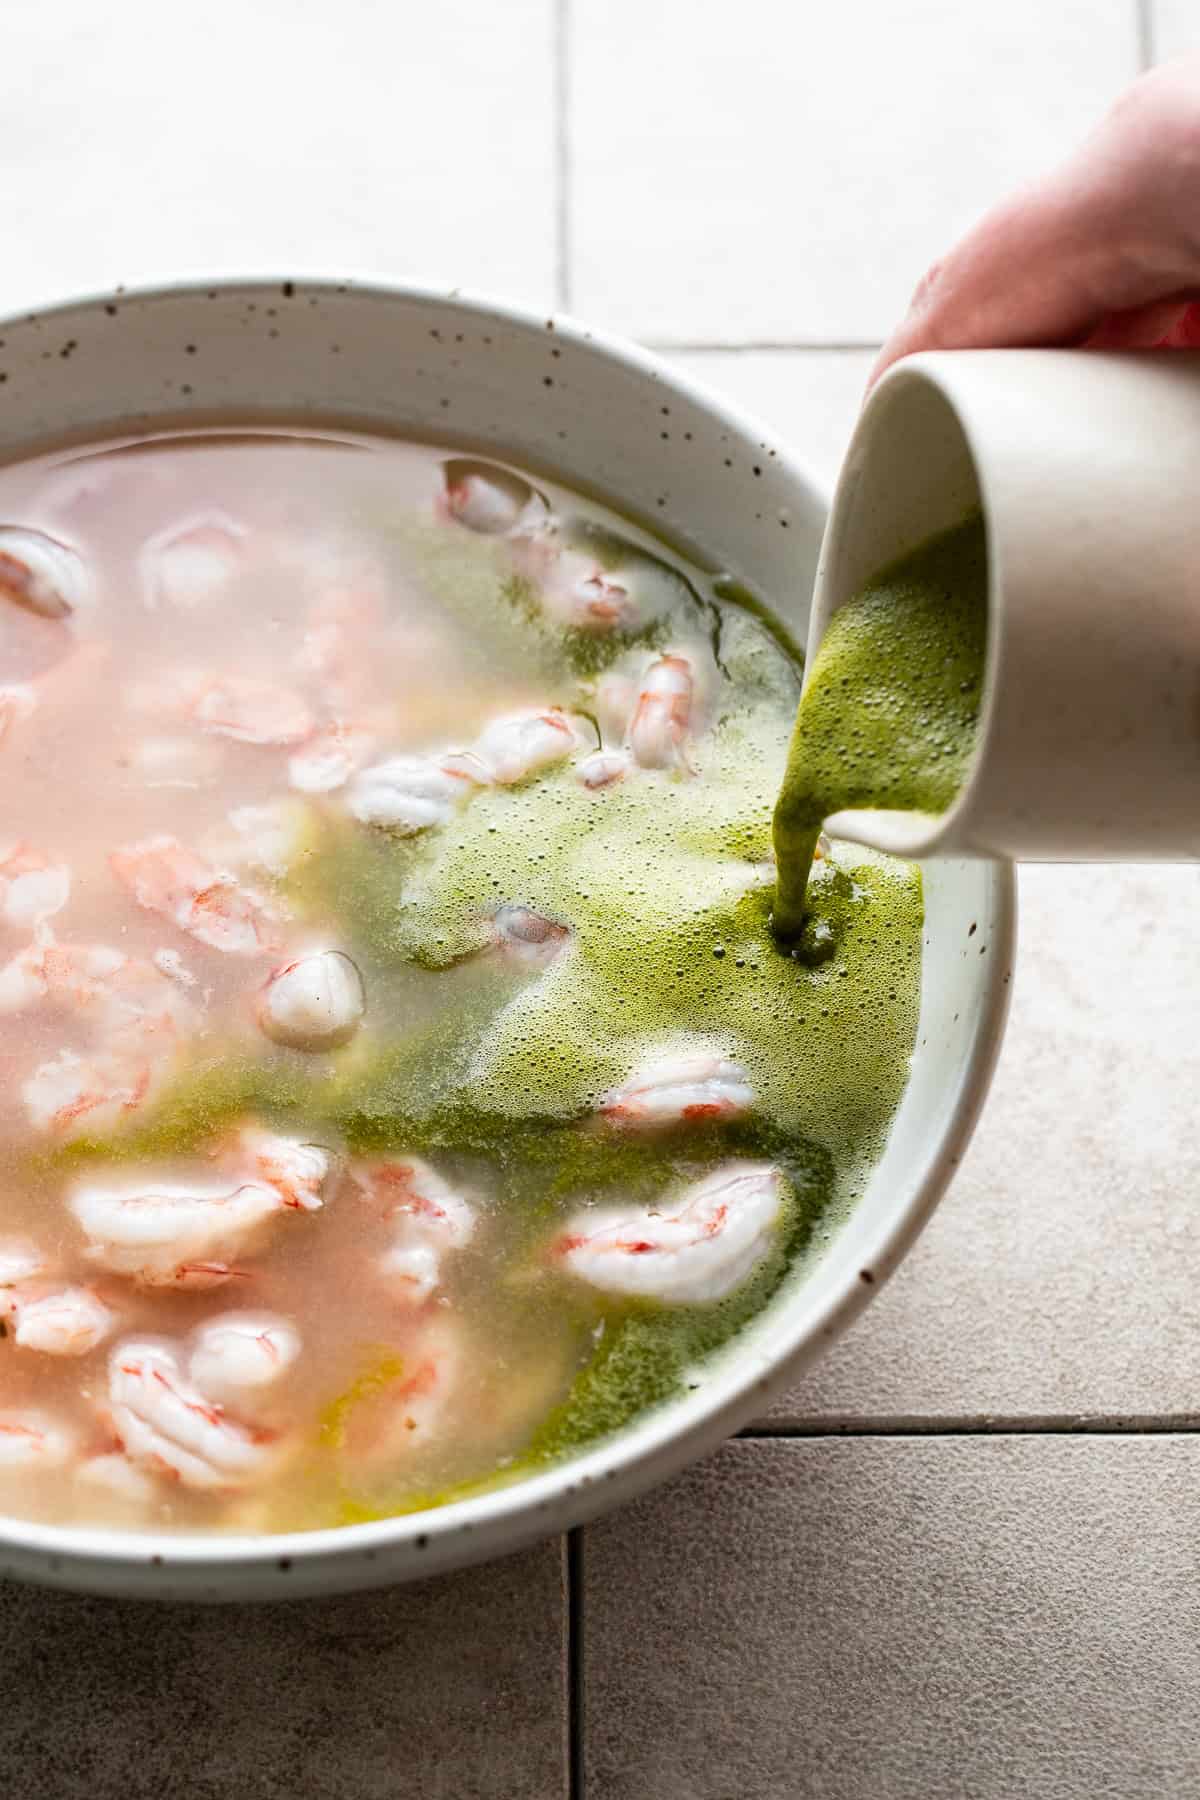 The blended cilantro, serrano, and lime juice mixture being poured into a bowl of shrimp aguachile.